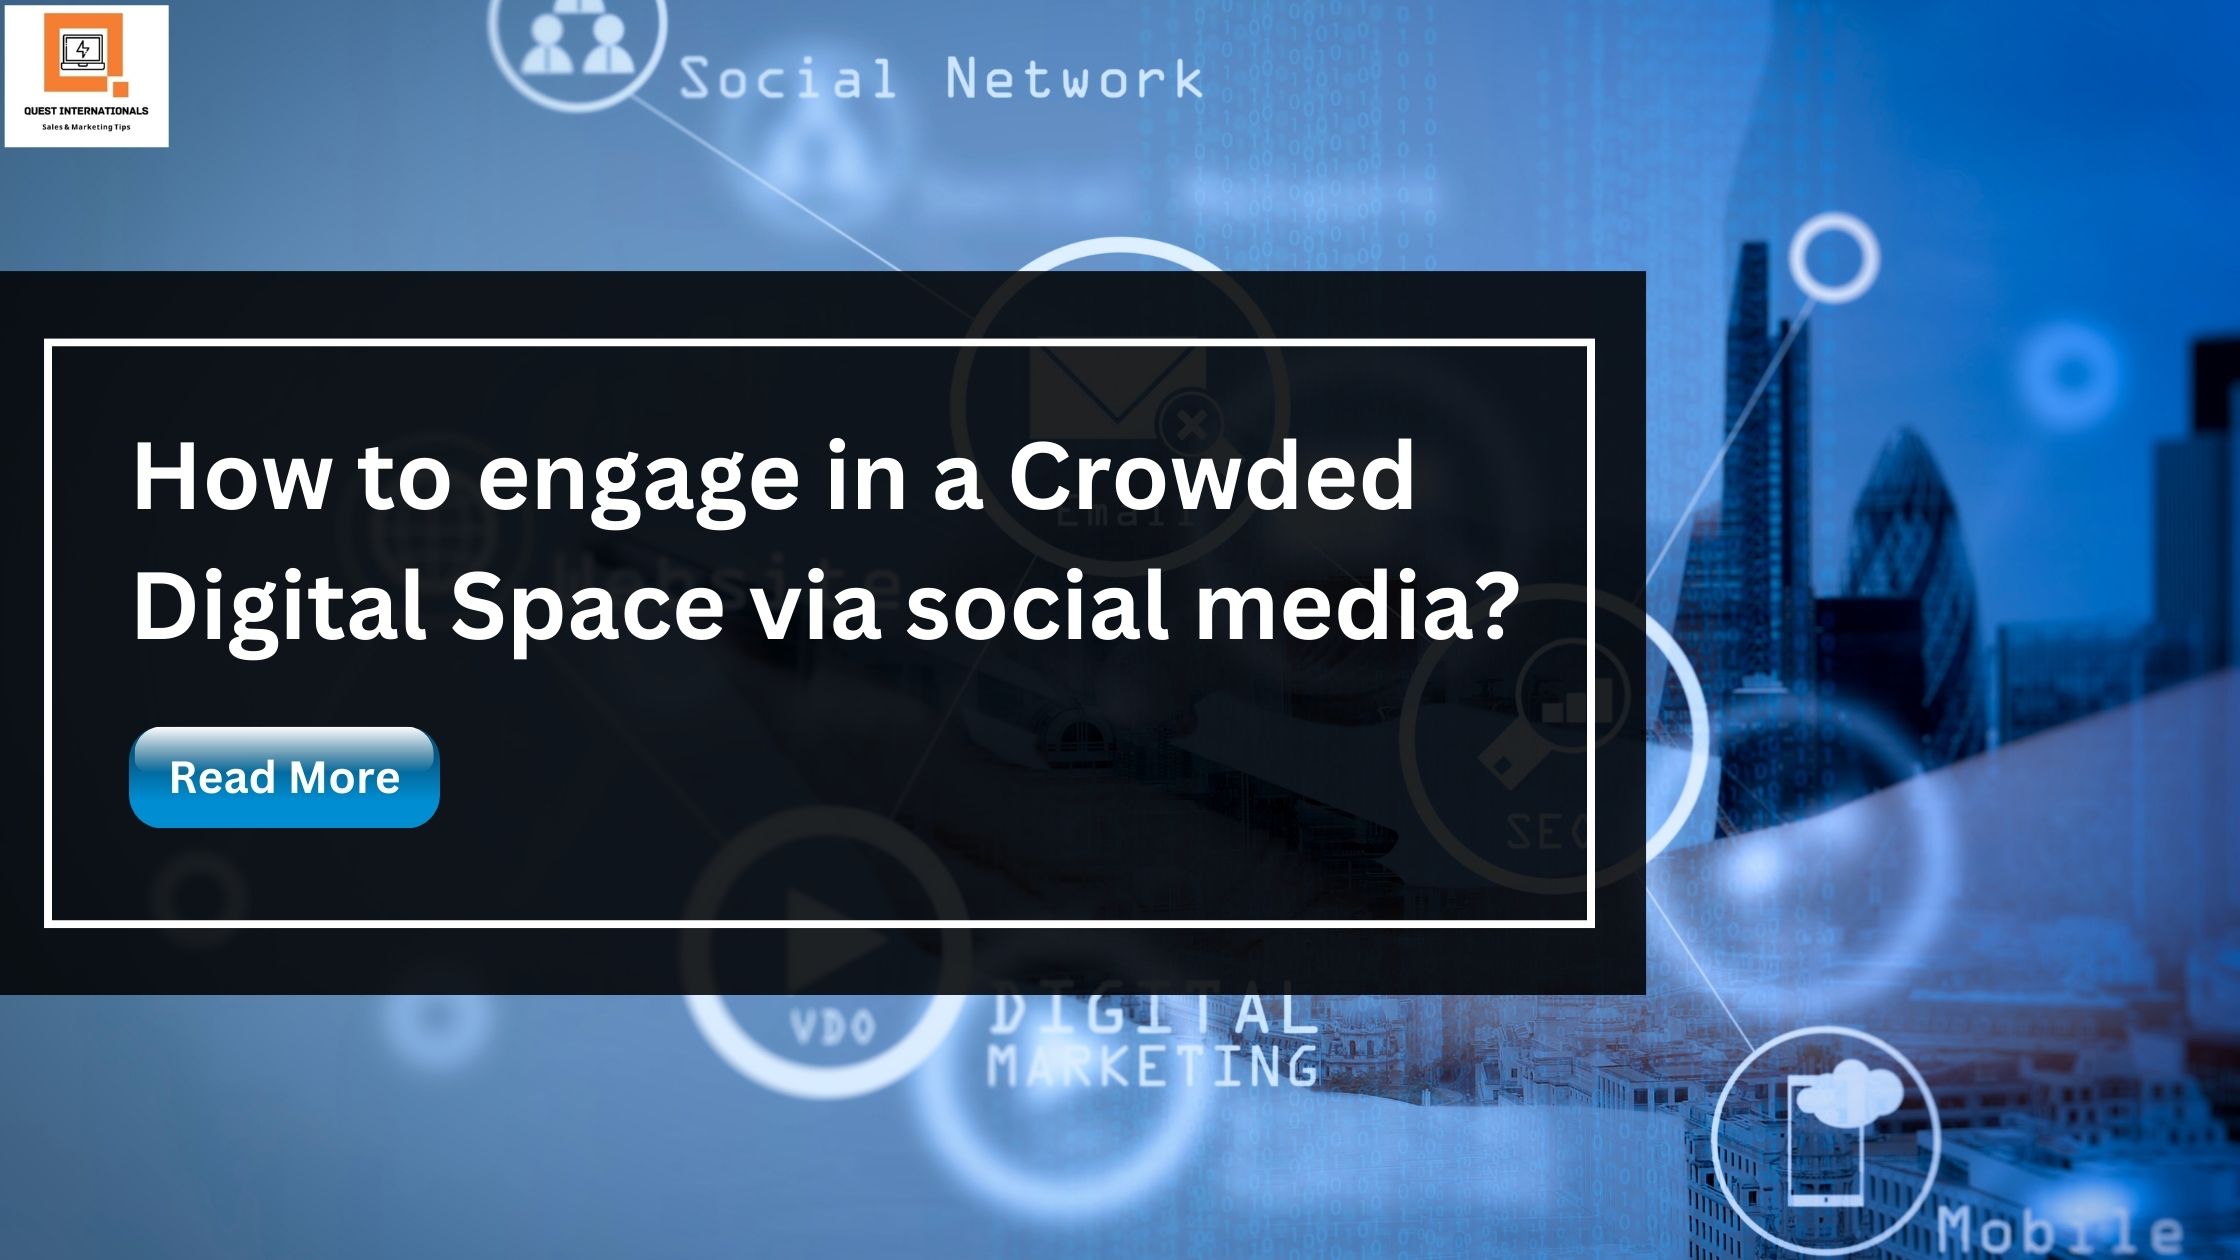 You are currently viewing How to engage in a Crowded Digital Space via social media?